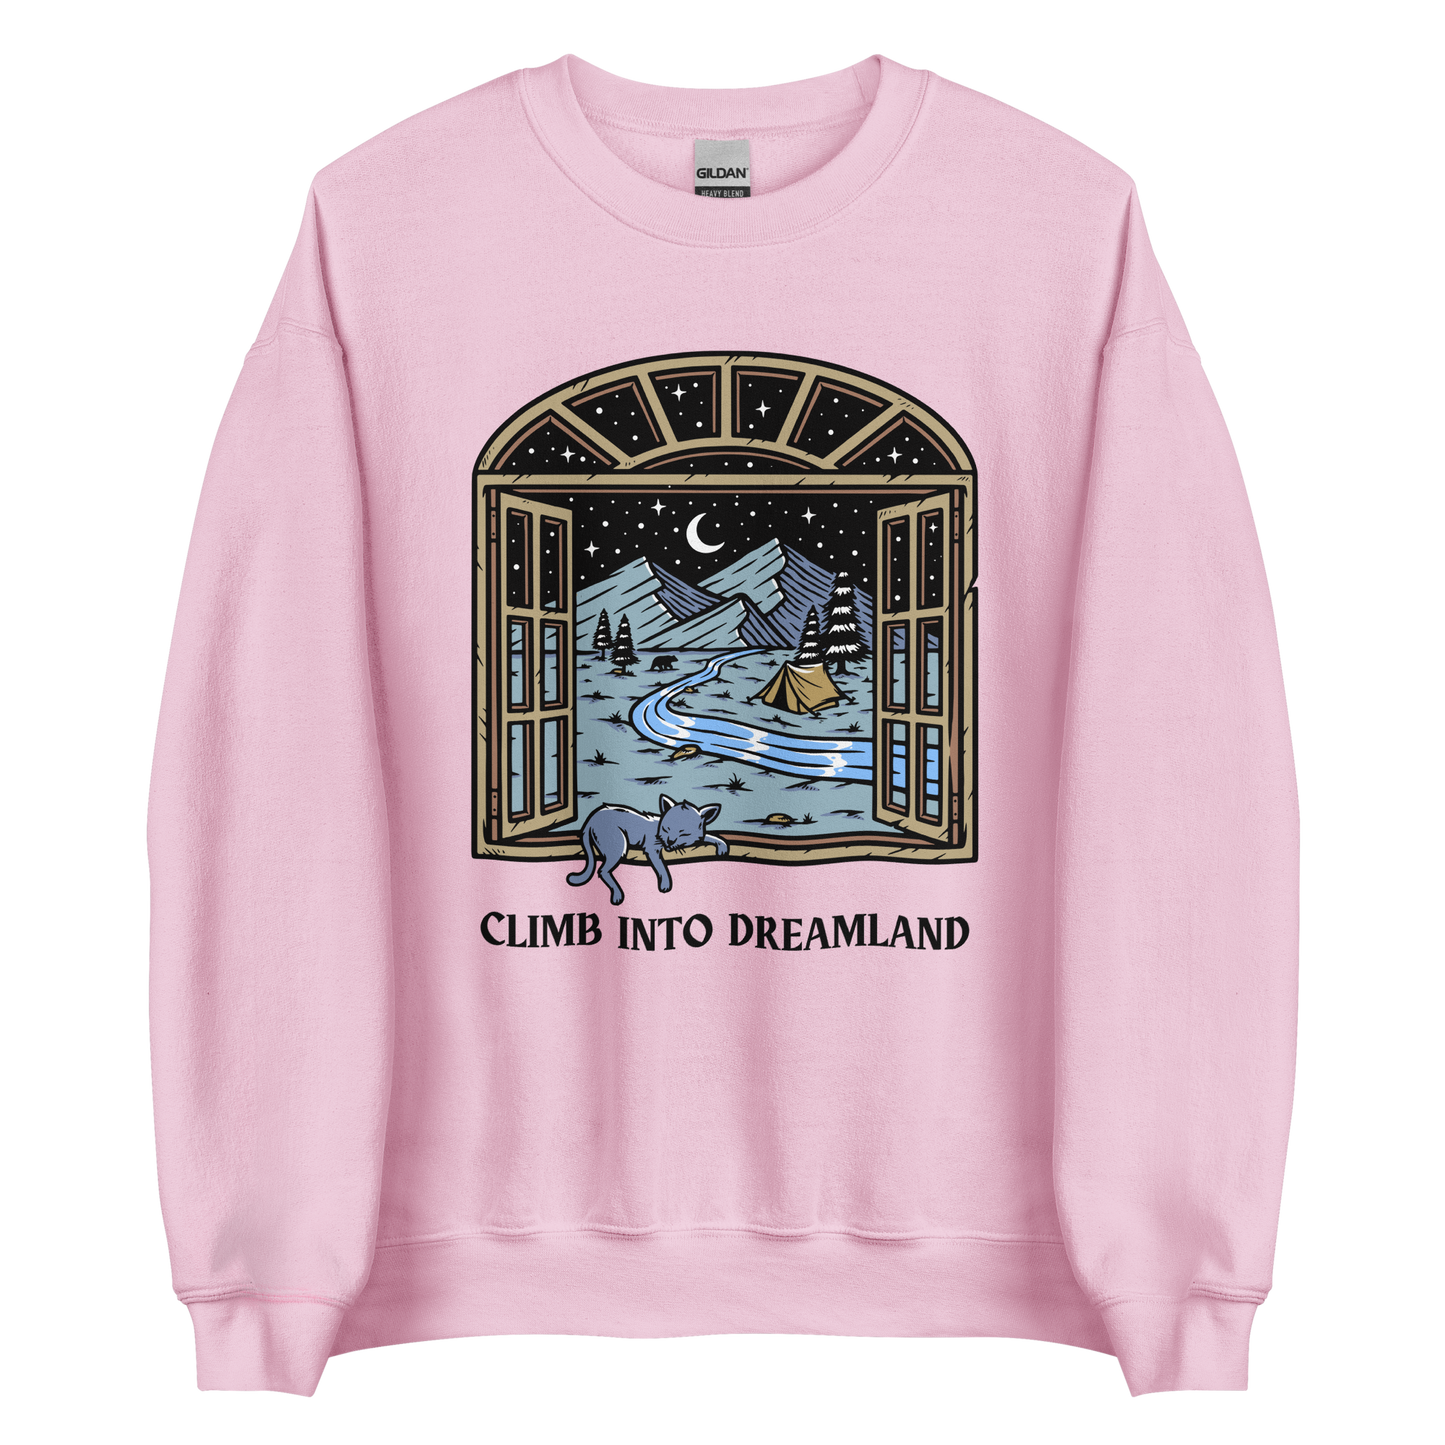 Light Pink Climb Into Dreamland Sweatshirt featuring a mesmerizing mountain view graphic on the chest - Cool Graphic Nature Sweatshirts - Boozy Fox